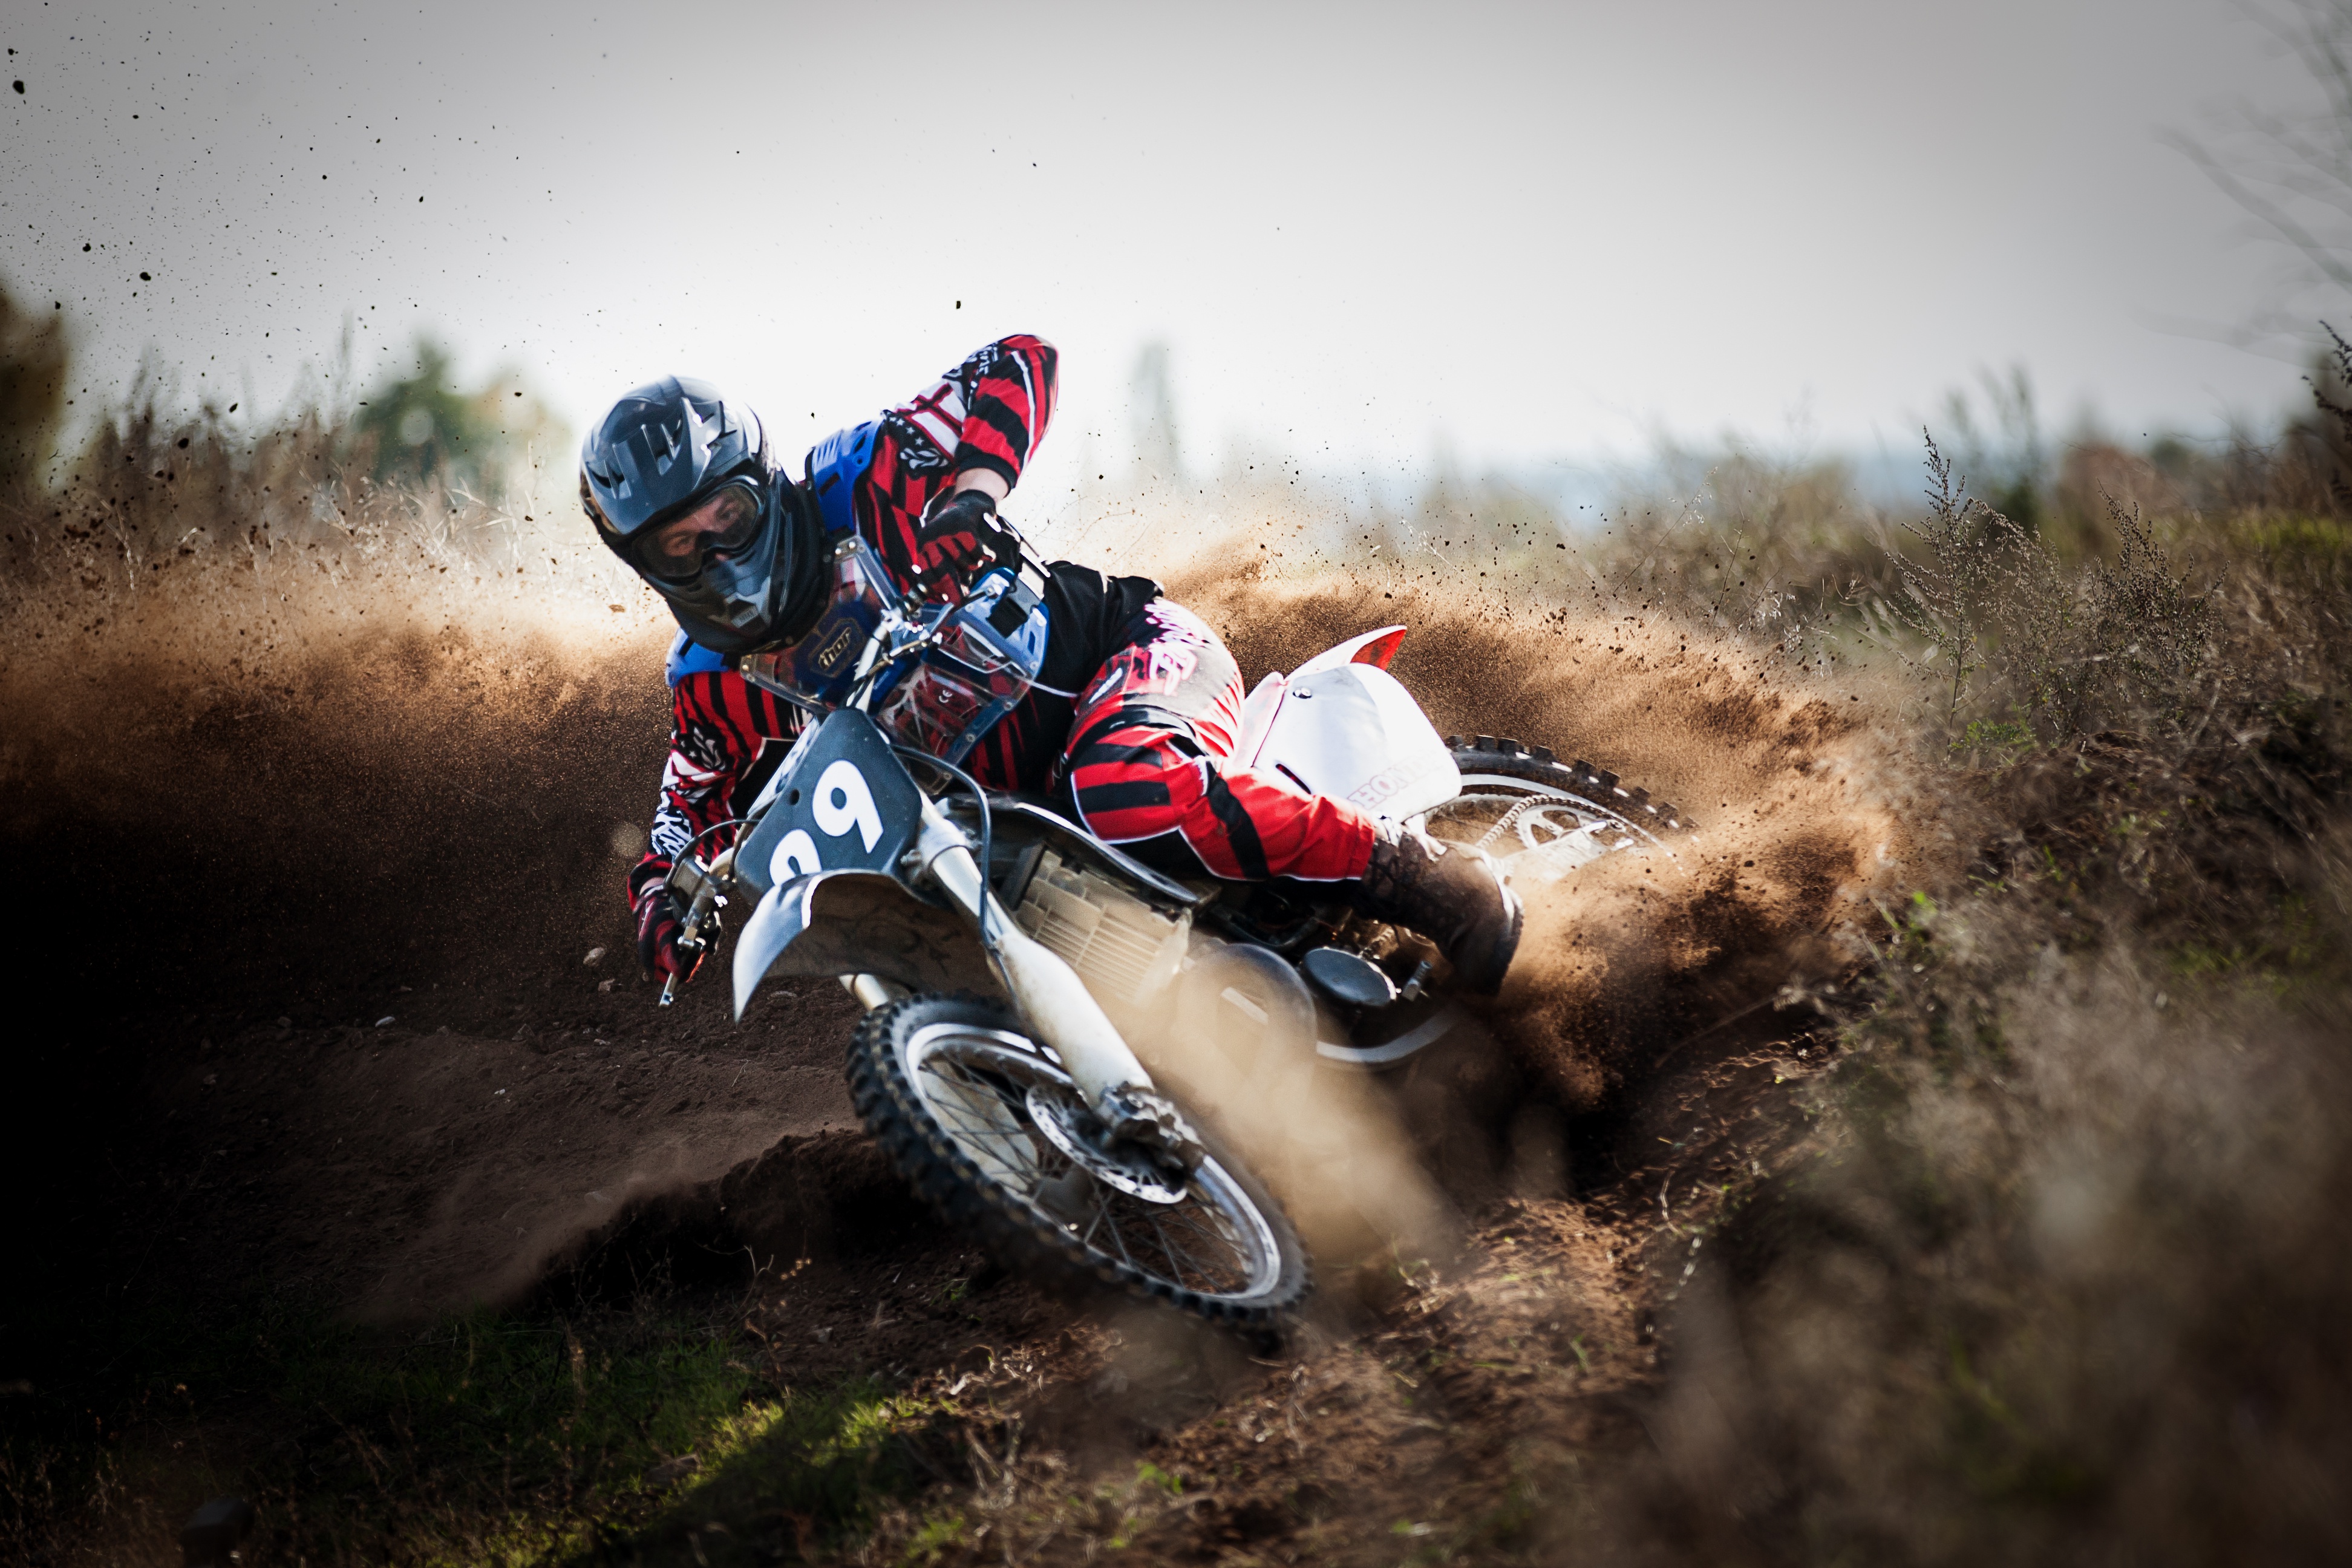 dirt, sports, motocross, motorcycle, vehicle